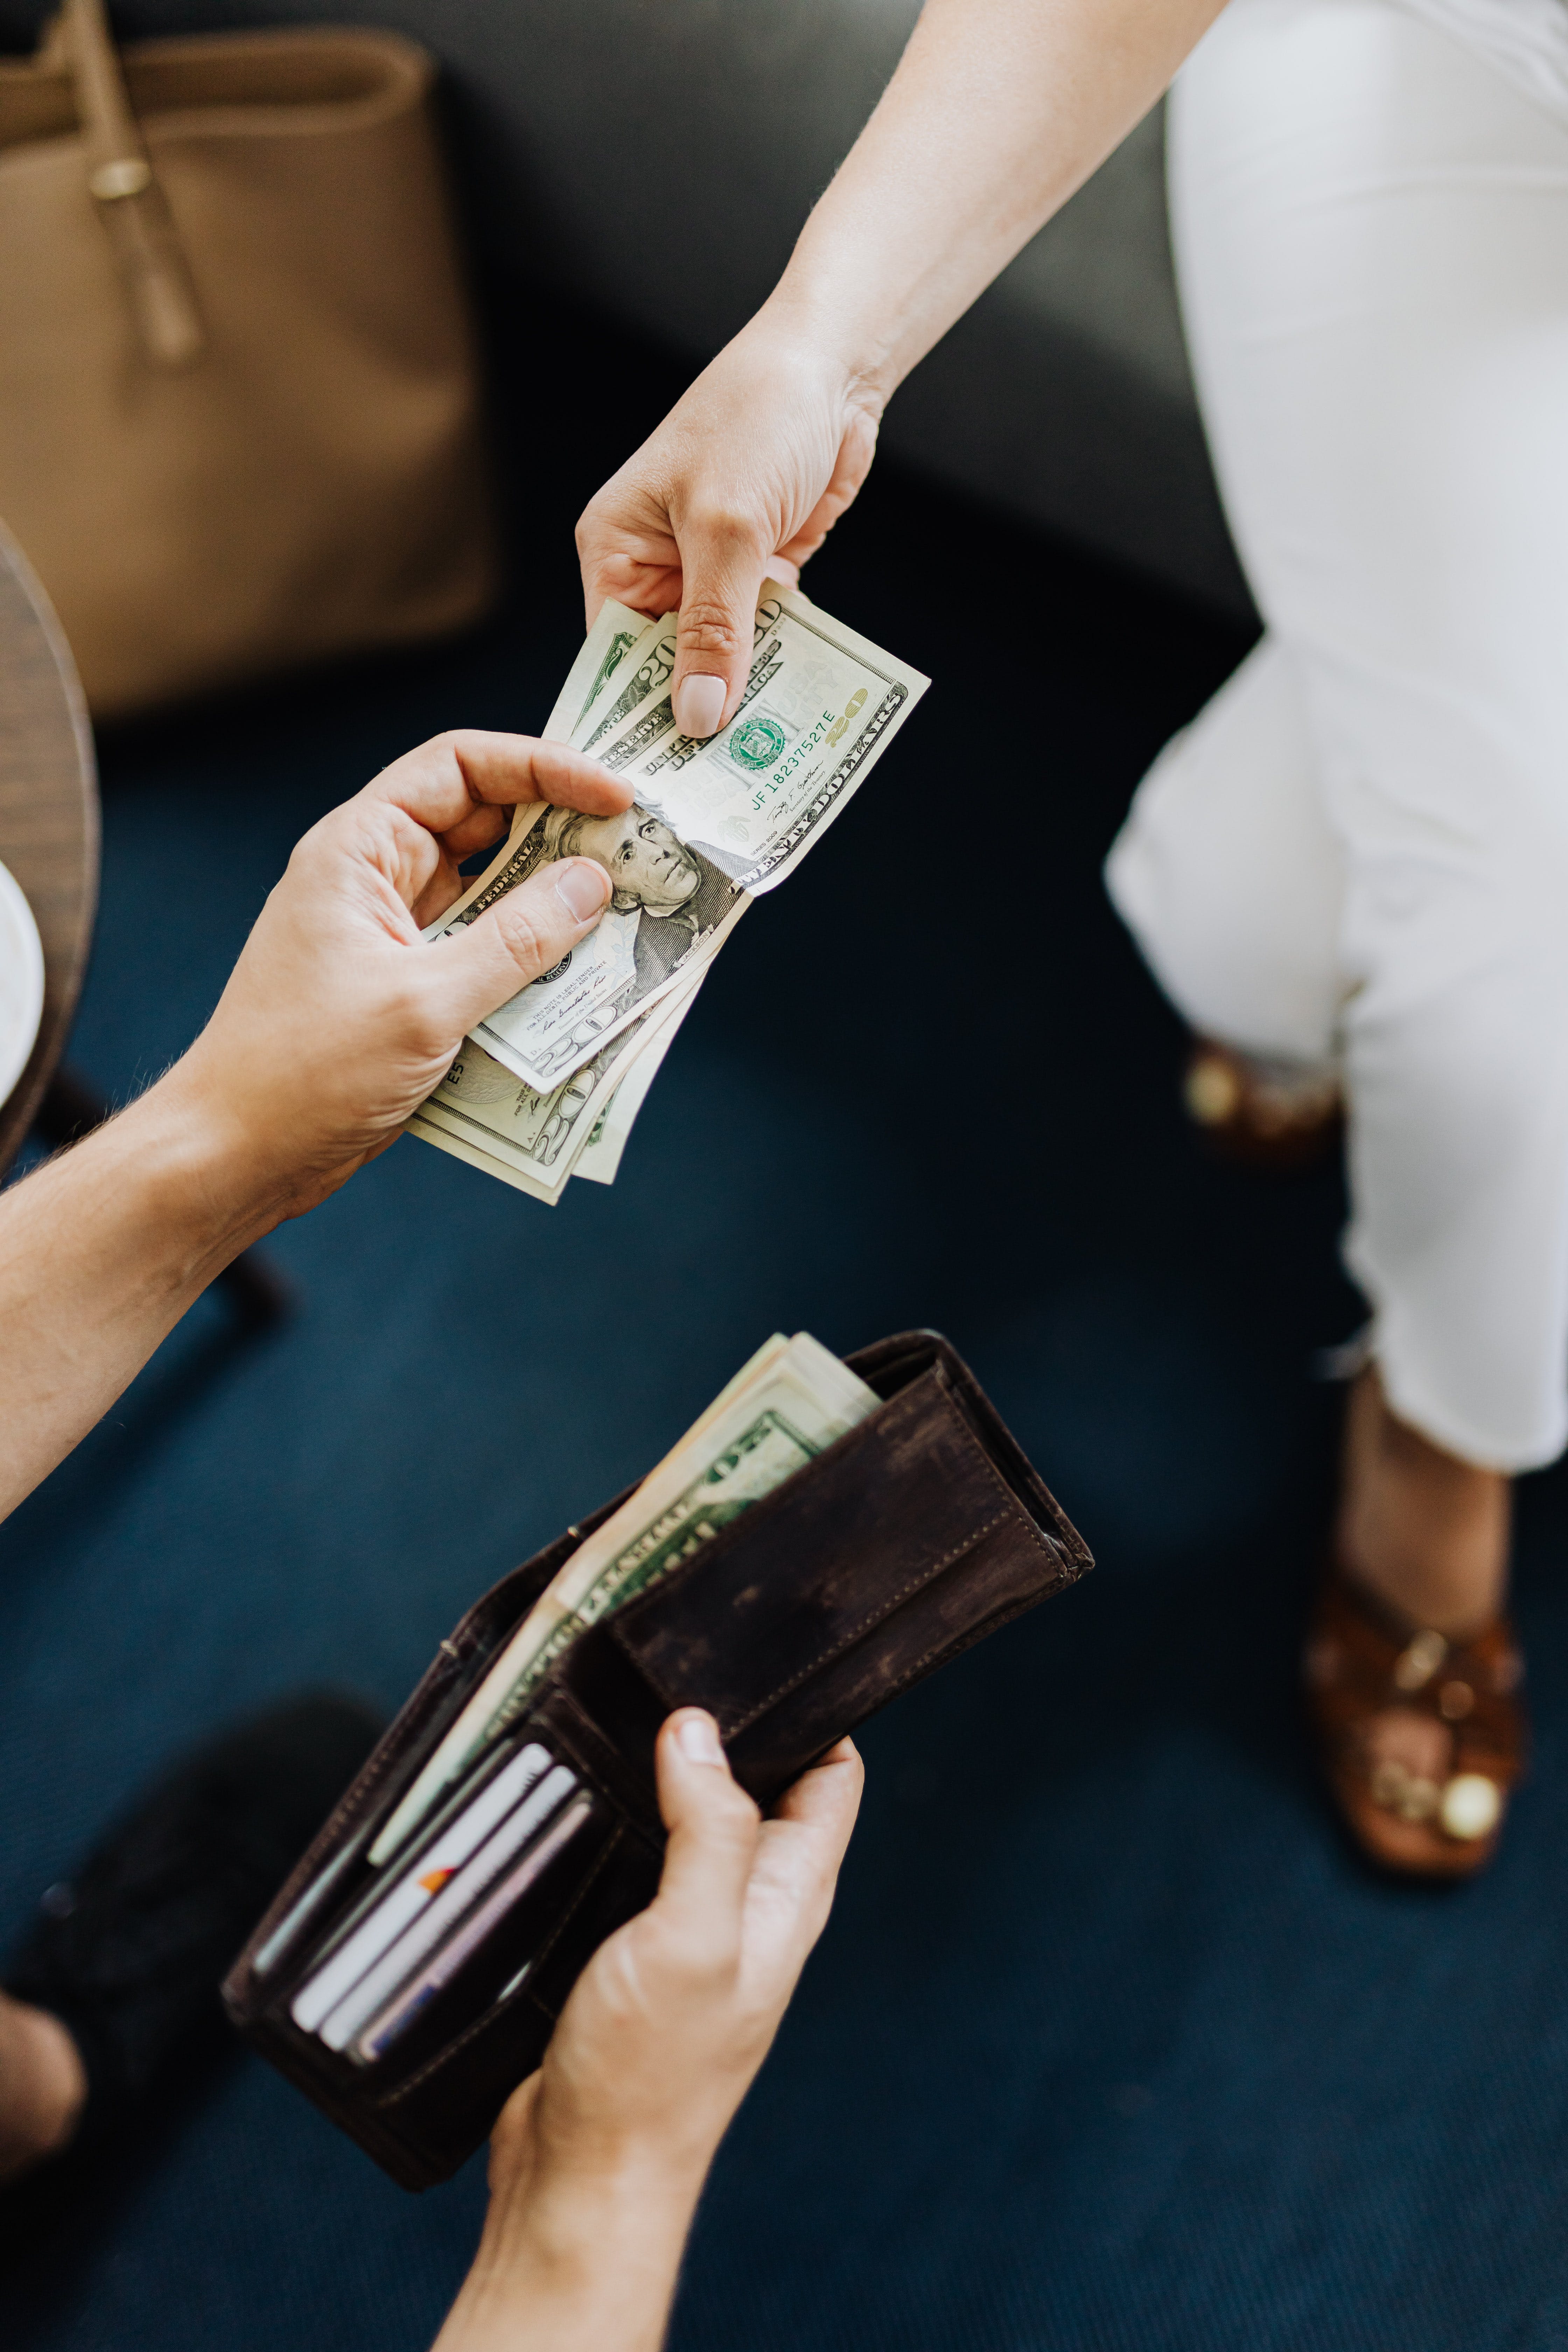 A person handing out money. | Source: Pexels